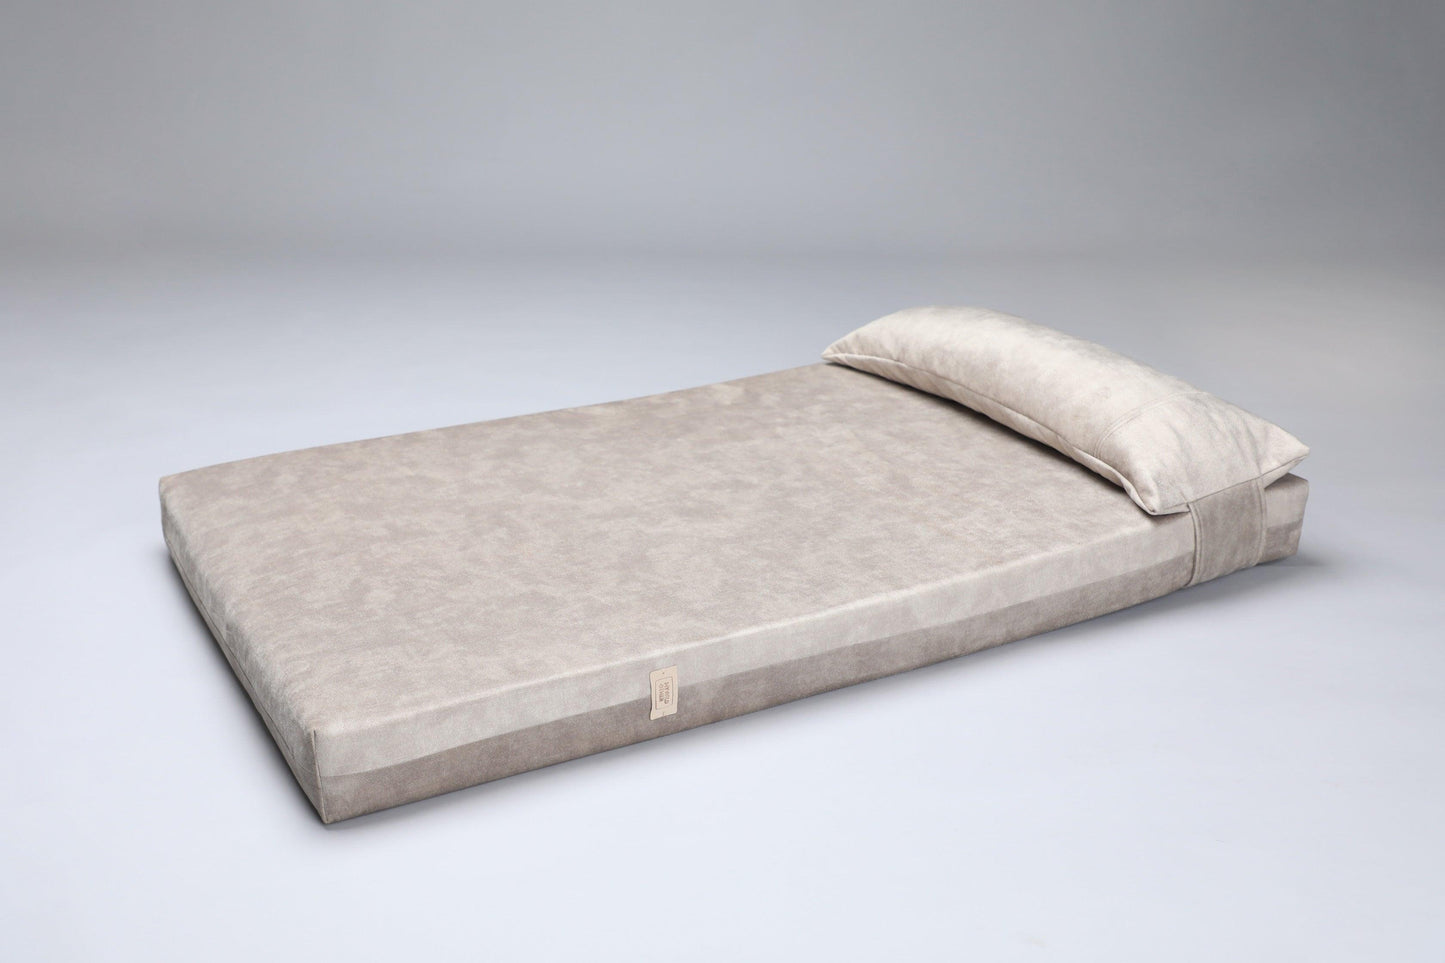 2-sided extra large & supportive dog bed. BEIGE - premium dog goods handmade in Europe by My Wild Other